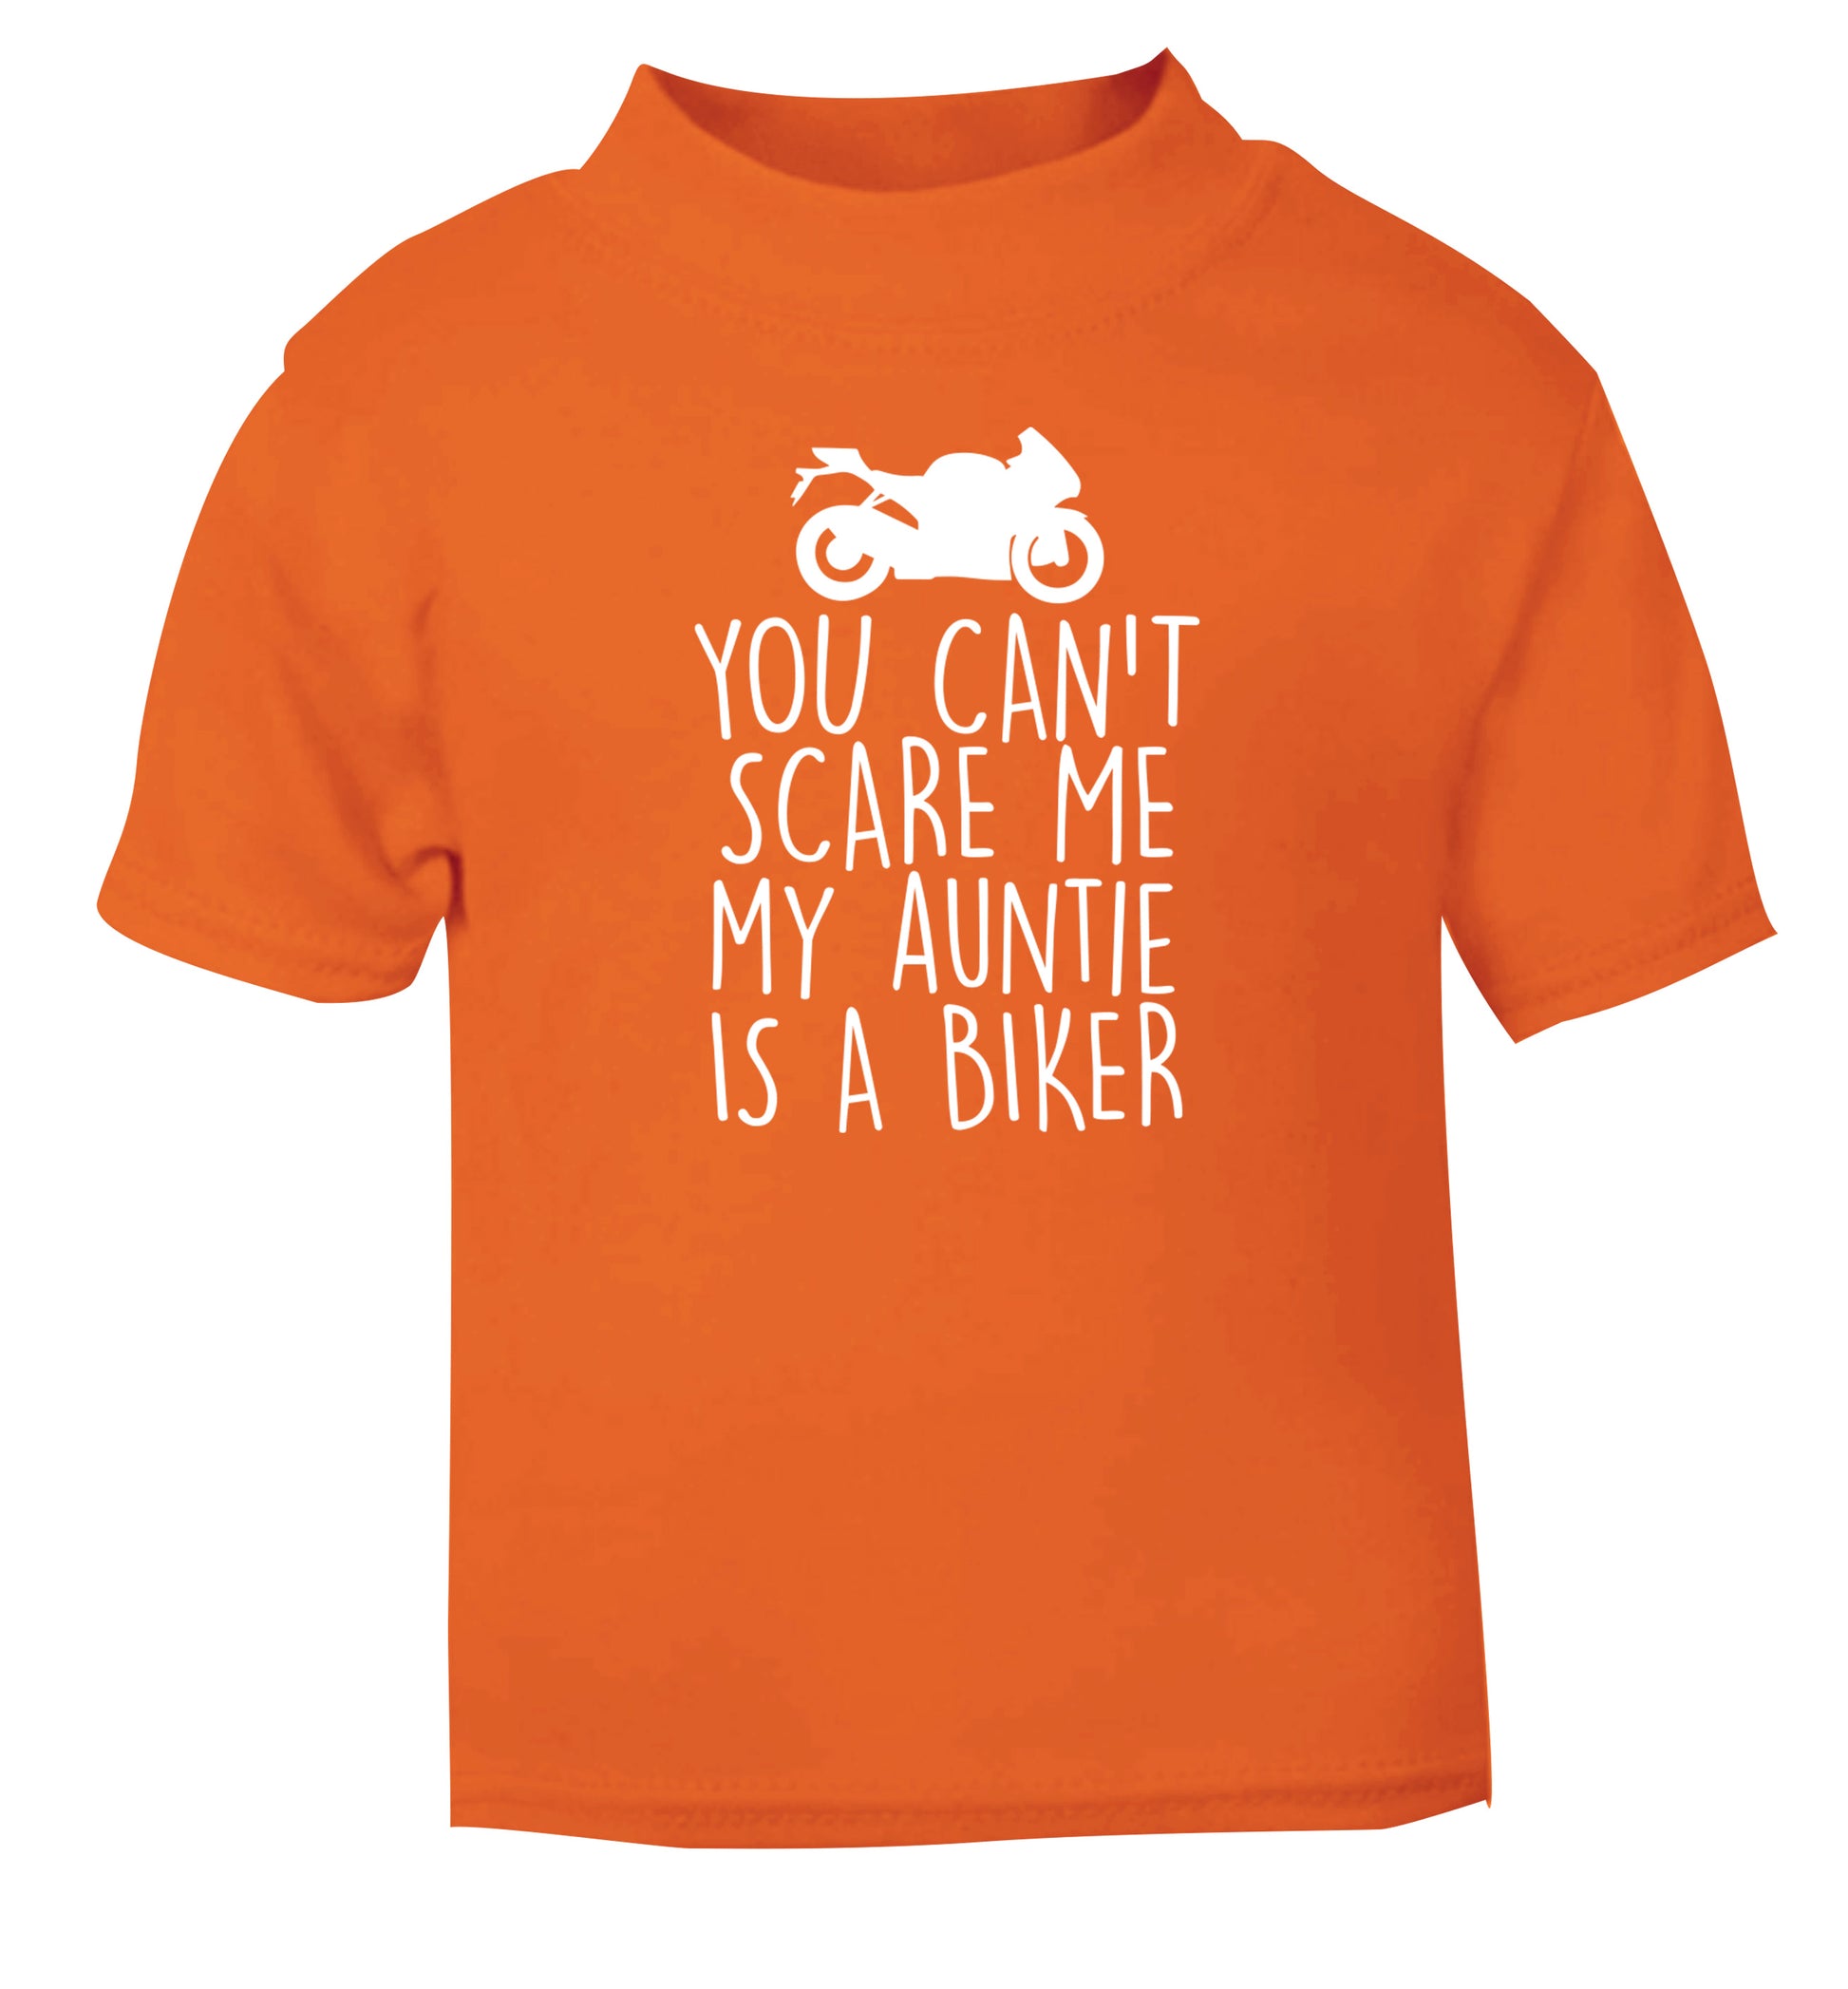 You can't scare me my auntie is a biker orange Baby Toddler Tshirt 2 Years